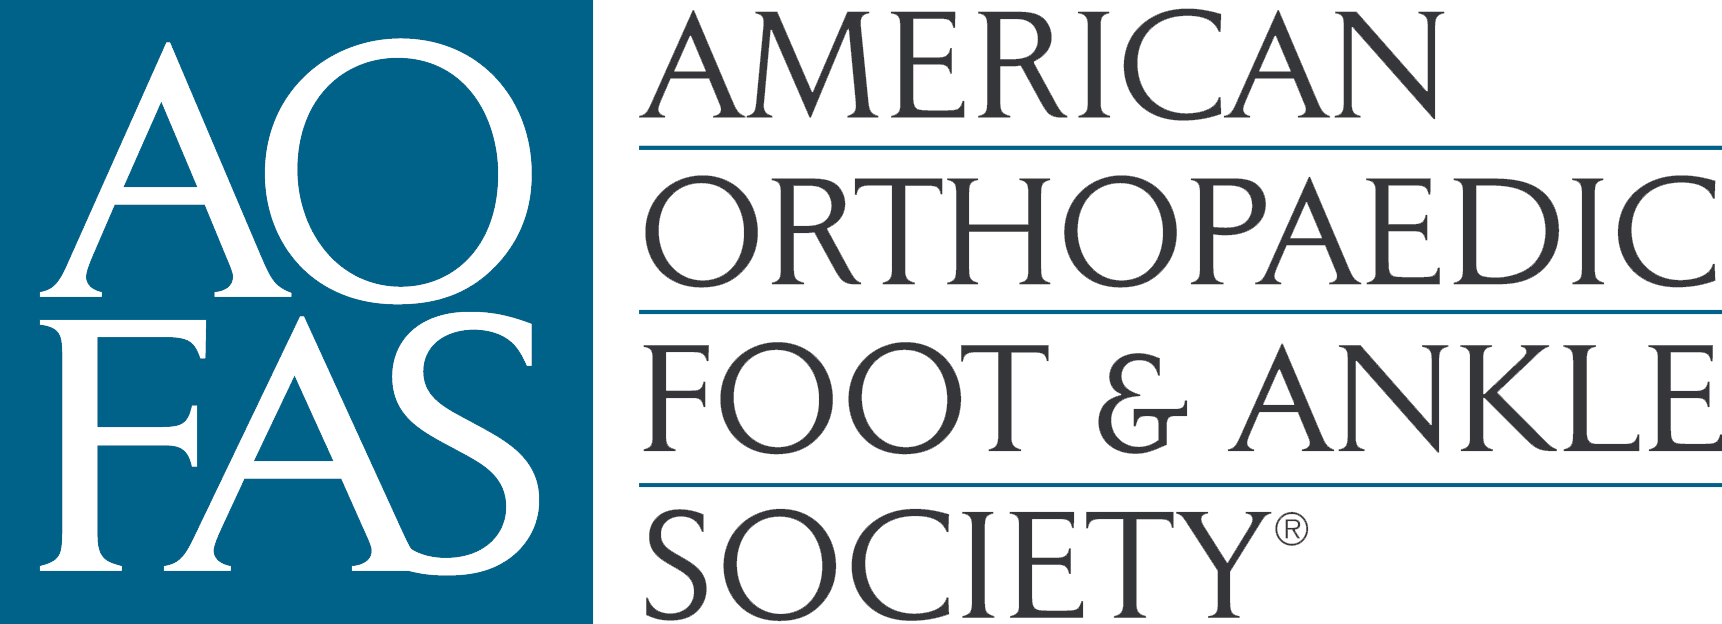 Logo of the American Orthopaedic Foot & Ankle Society